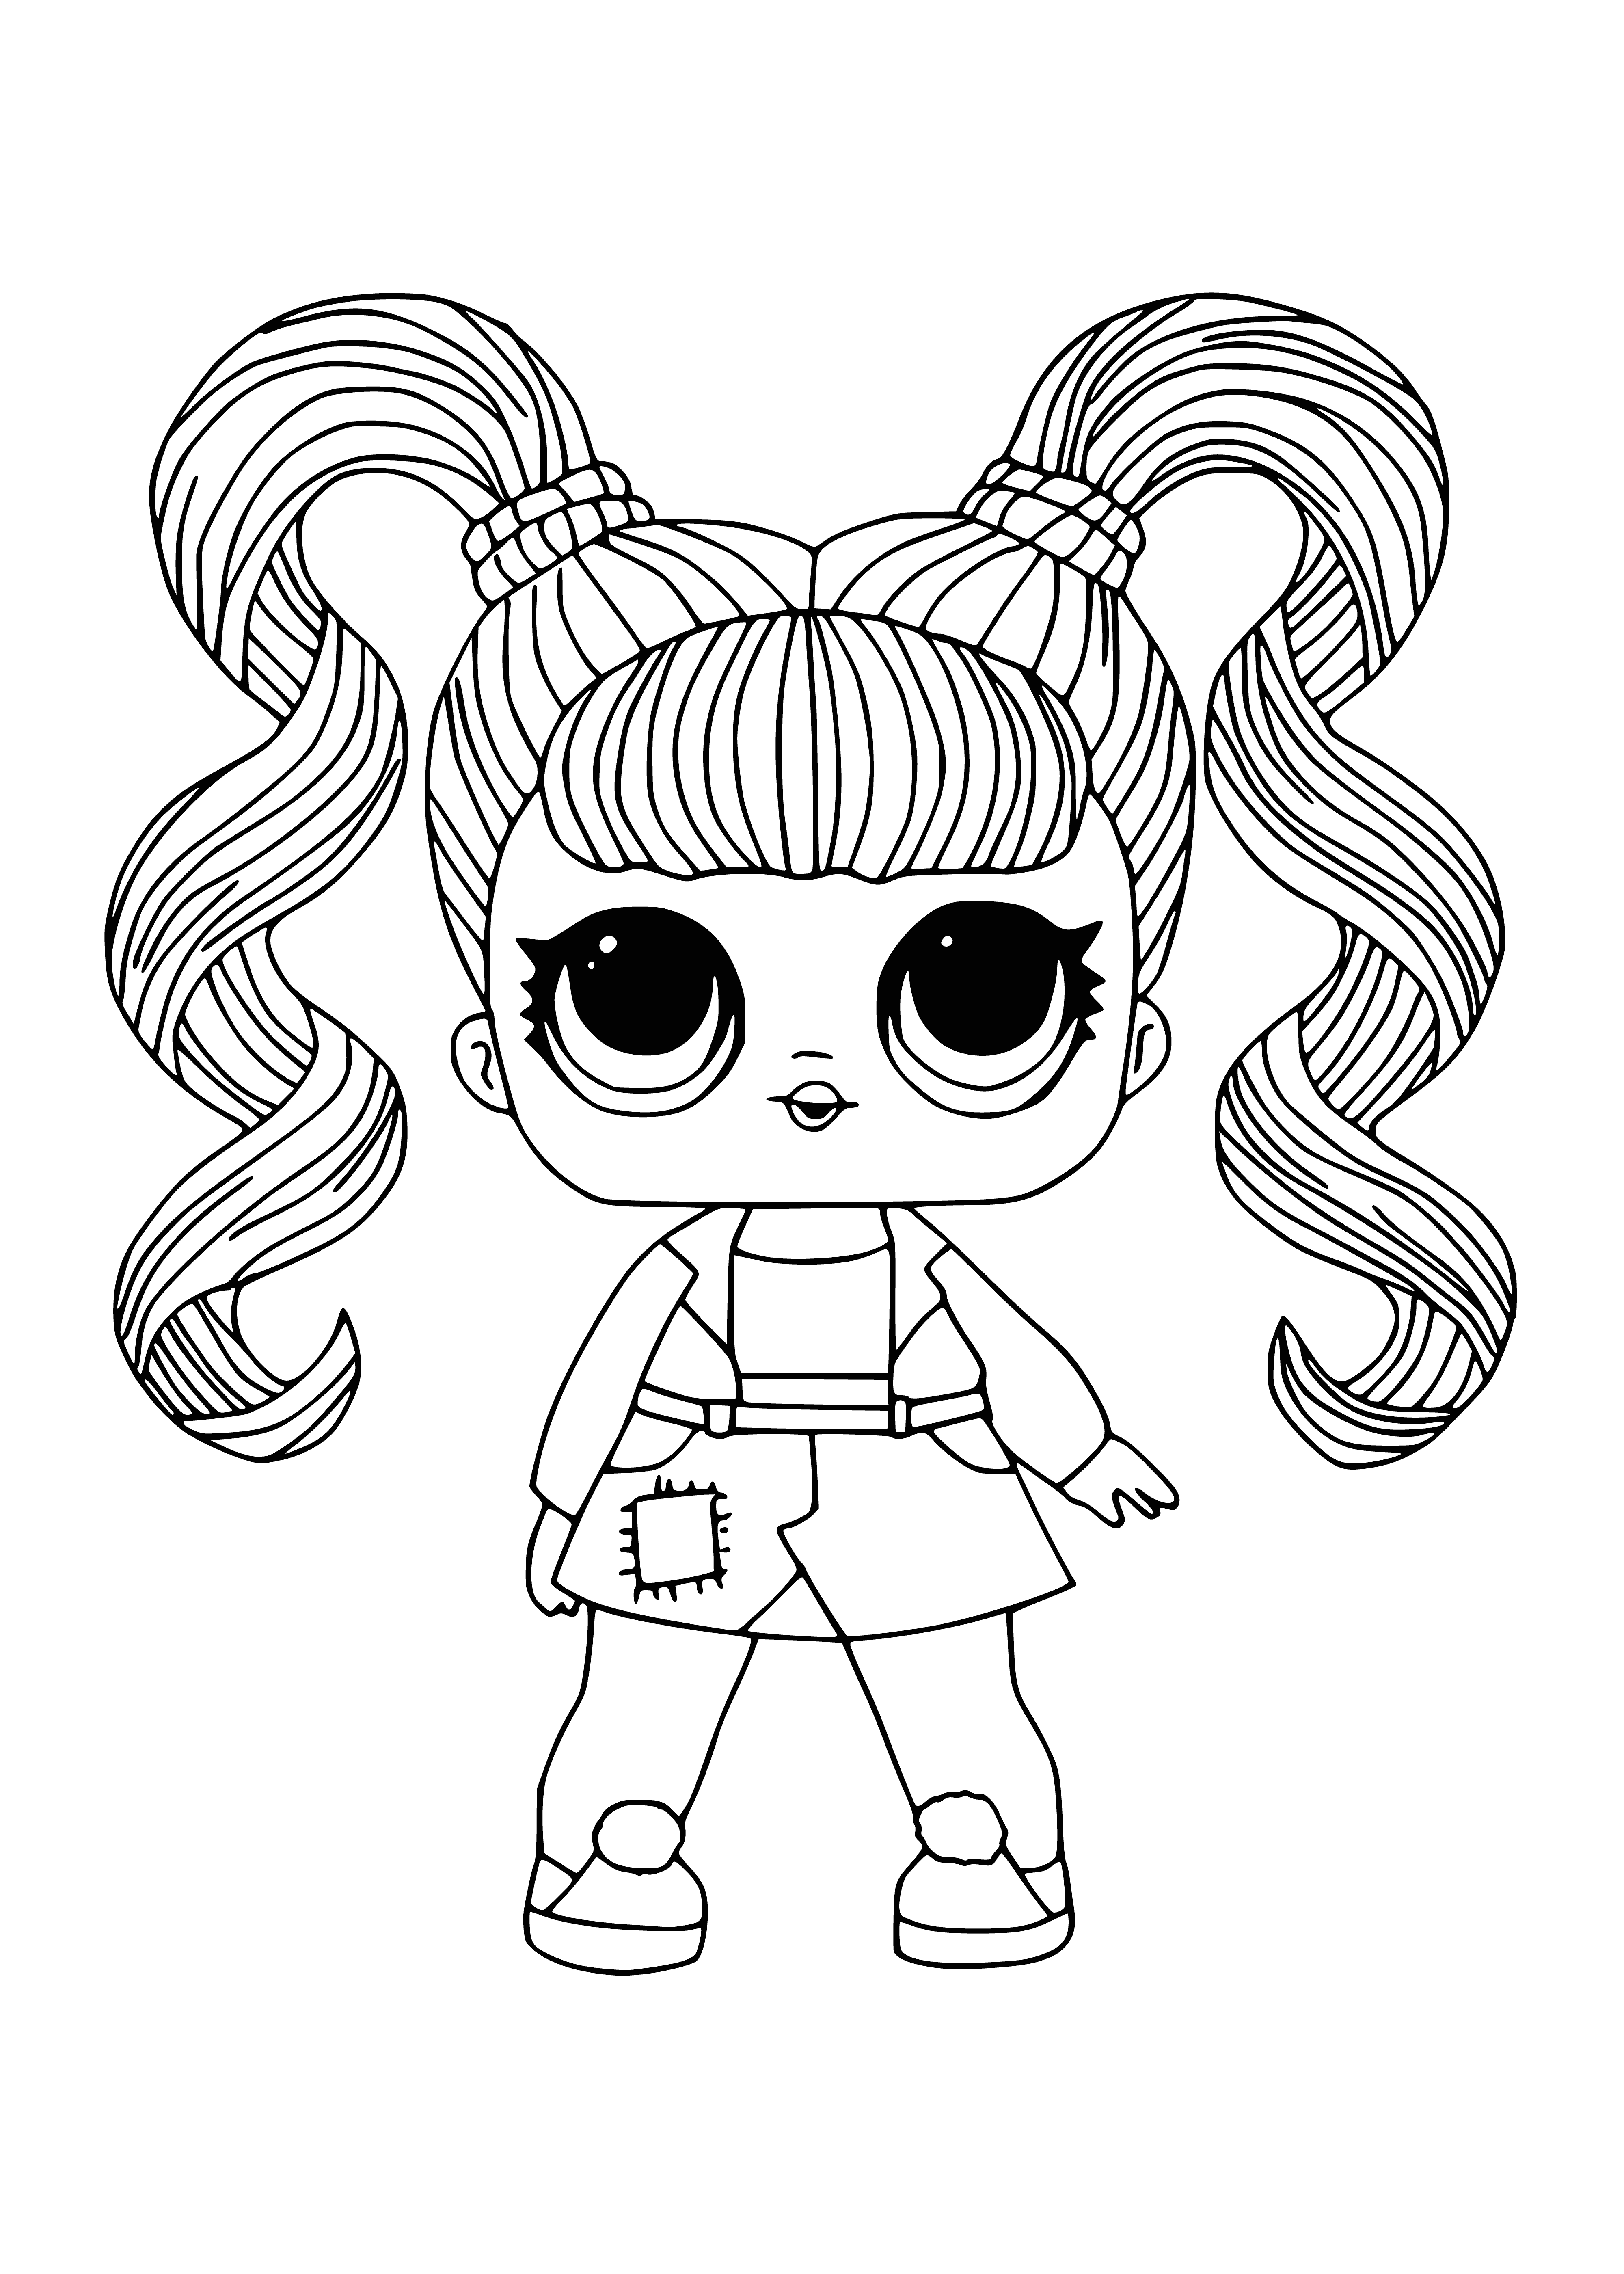 Jelly Jam coloring page